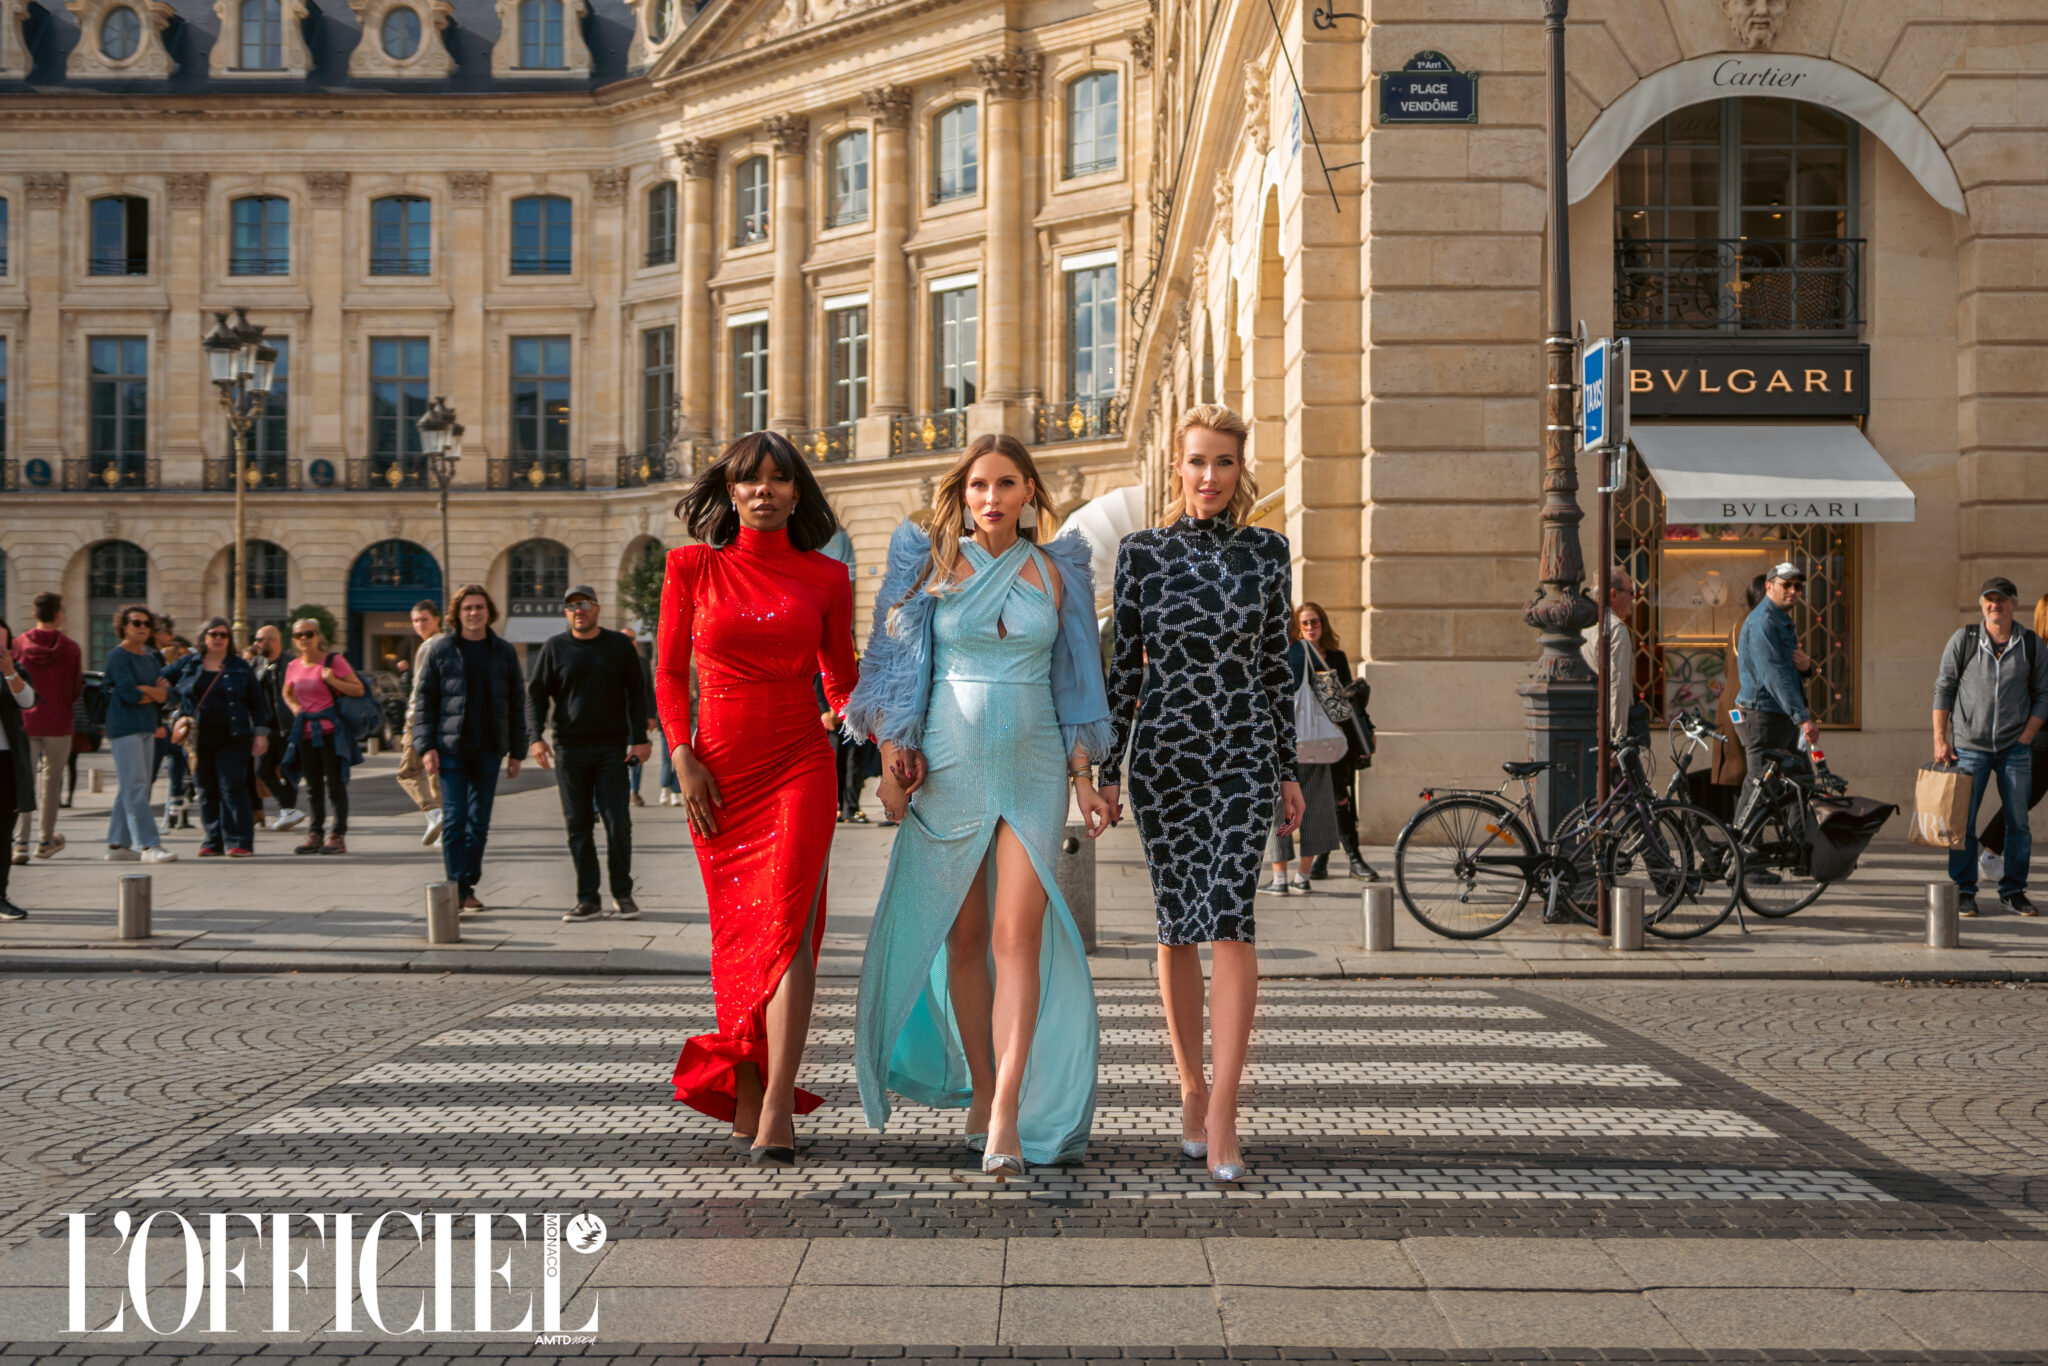 Feature at L'Officiel Monaco during Paris Fashion Week SS 23. Visual Fashion Story from the magical Paris. Featuring: Nicolas Besson, Gemy Maalouf, Charriol, Sol Angelann and more. 6